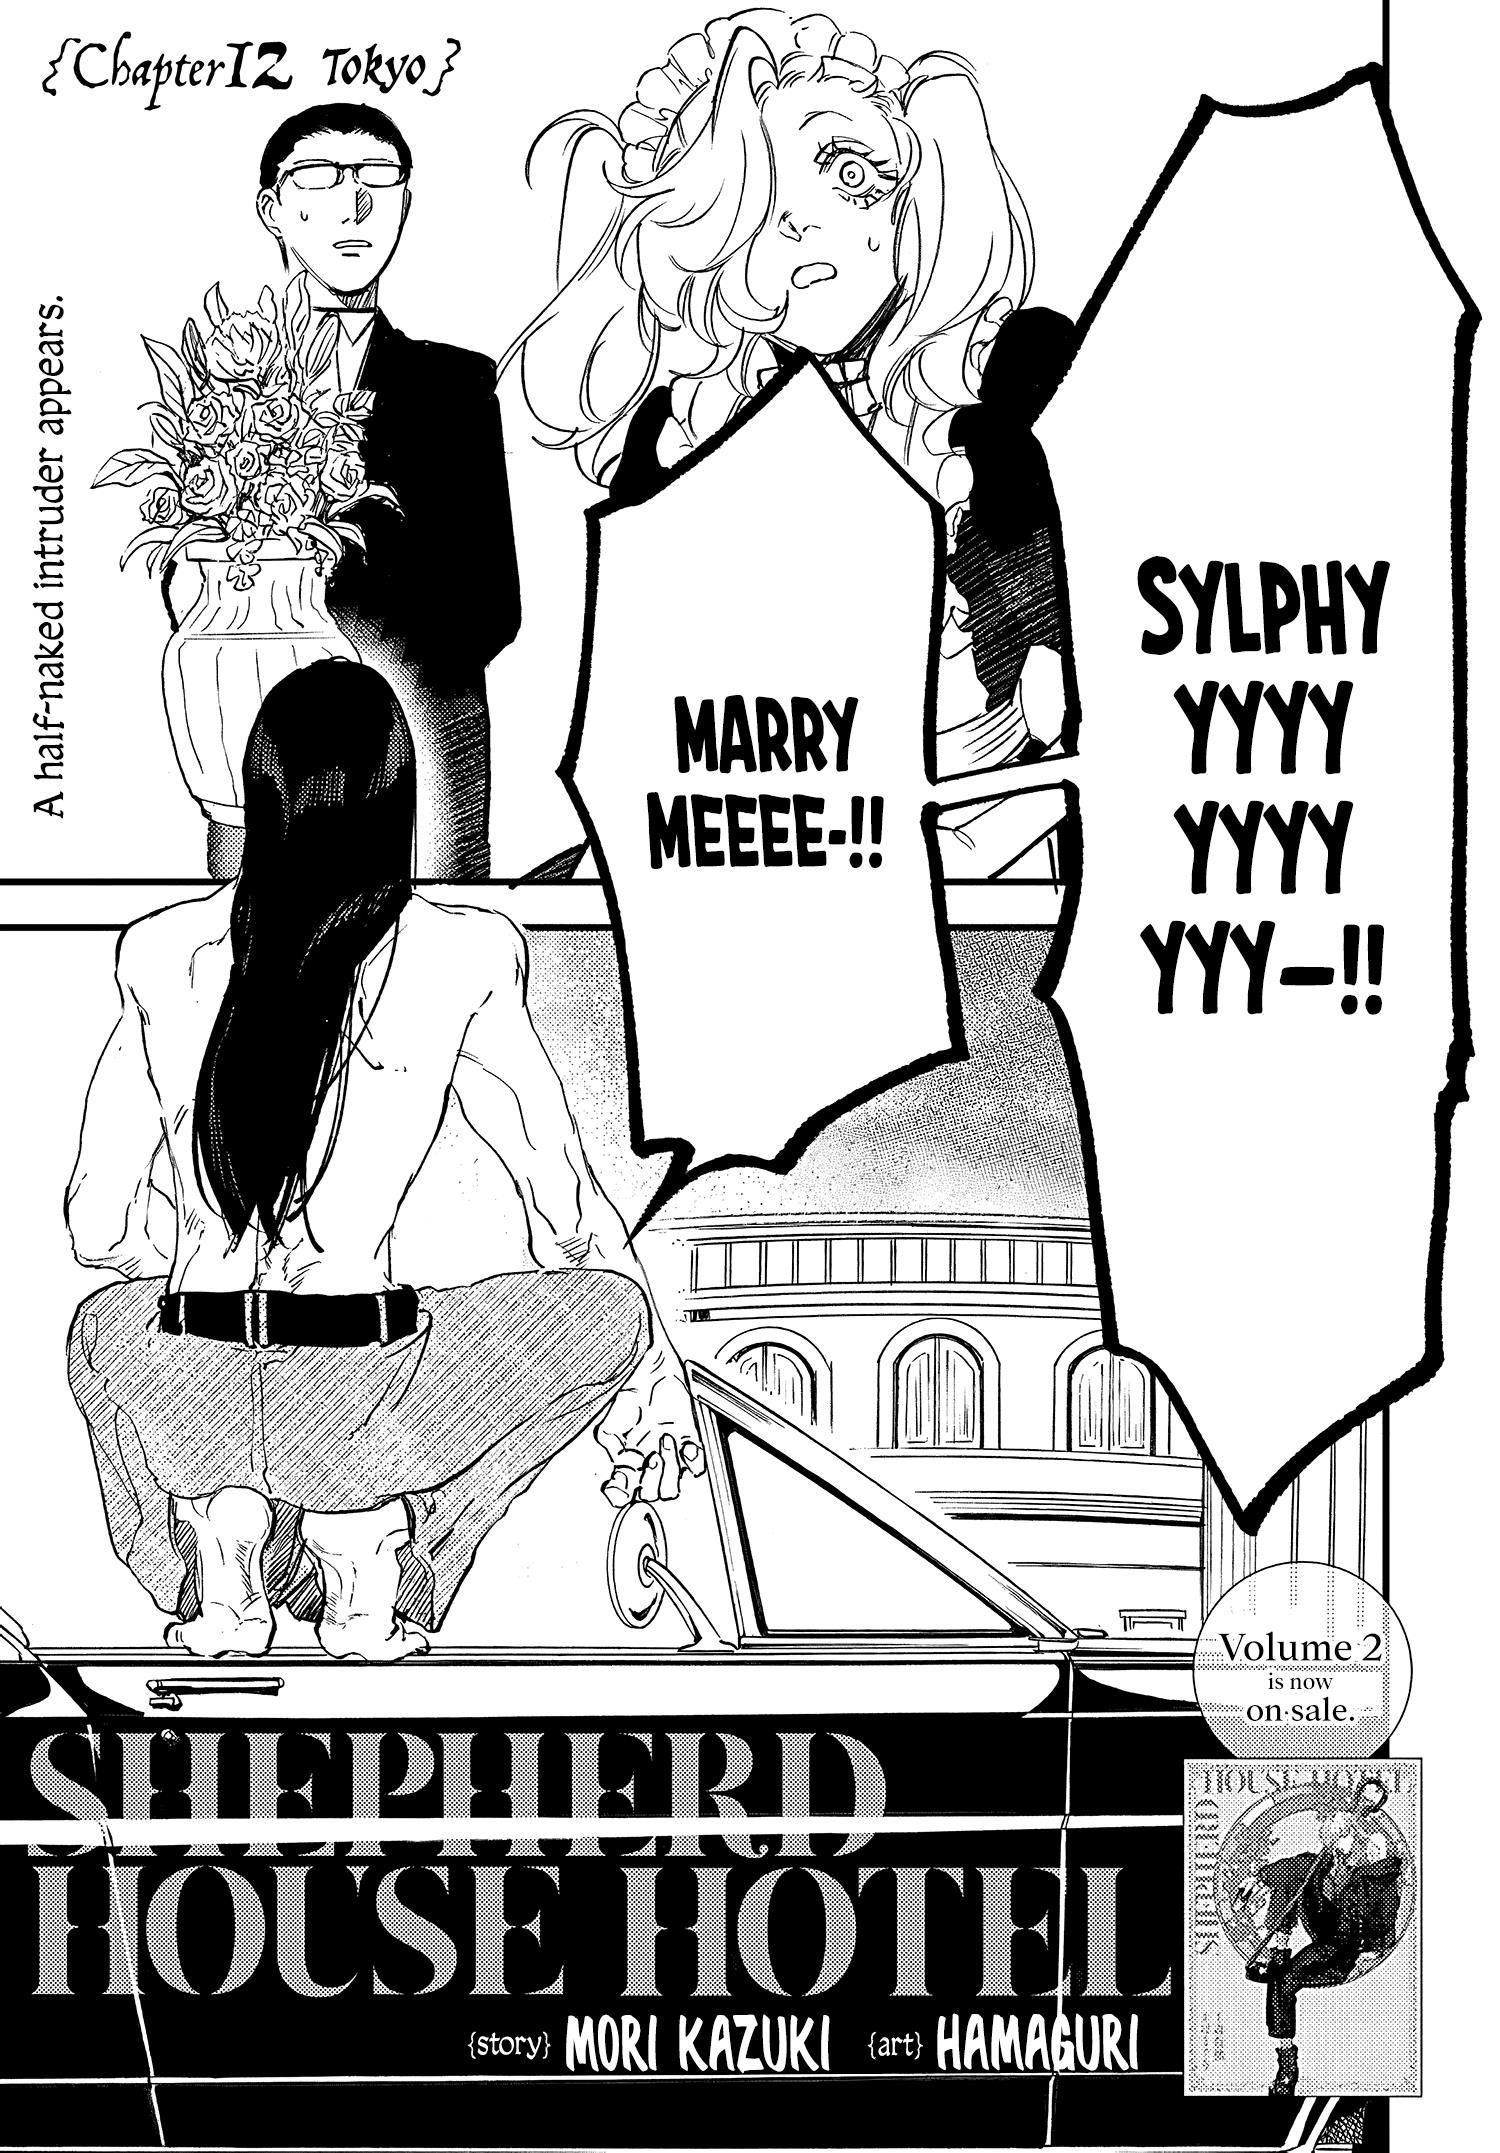 Shepherd House Hotel Vol.3 Chapter 12: Tokyo - Picture 2